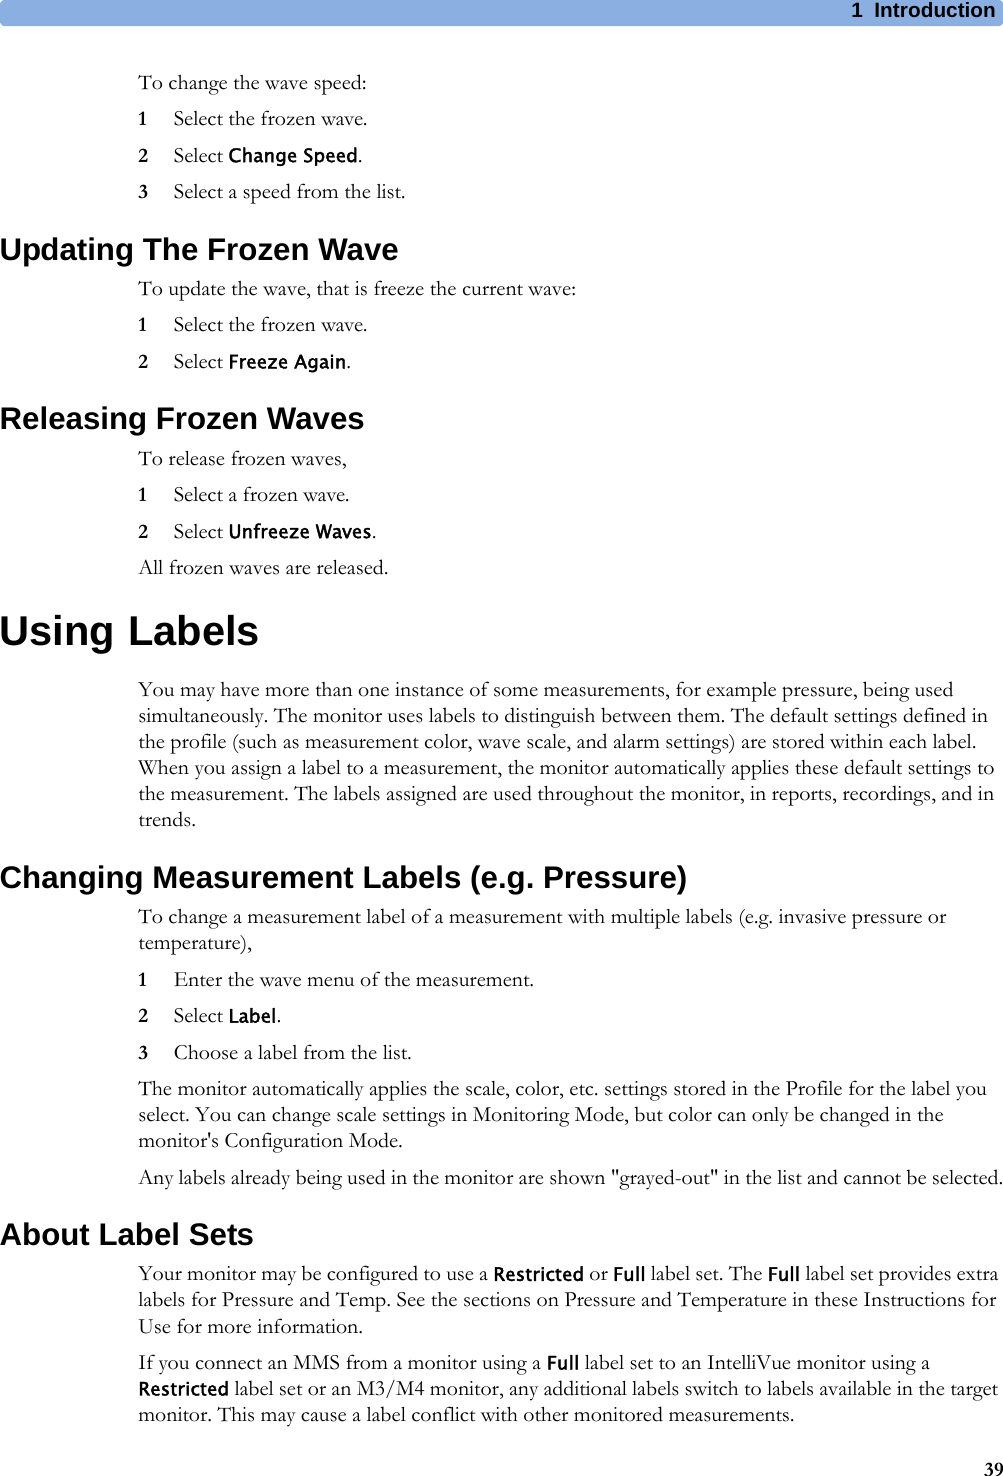 1 Introduction39To change the wave speed:1Select the frozen wave.2Select Change Speed.3Select a speed from the list.Updating The Frozen WaveTo update the wave, that is freeze the current wave:1Select the frozen wave.2Select Freeze Again.Releasing Frozen WavesTo release frozen waves,1Select a frozen wave.2Select Unfreeze Waves.All frozen waves are released.Using LabelsYou may have more than one instance of some measurements, for example pressure, being used simultaneously. The monitor uses labels to distinguish between them. The default settings defined in the profile (such as measurement color, wave scale, and alarm settings) are stored within each label. When you assign a label to a measurement, the monitor automatically applies these default settings to the measurement. The labels assigned are used throughout the monitor, in reports, recordings, and in trends.Changing Measurement Labels (e.g. Pressure)To change a measurement label of a measurement with multiple labels (e.g. invasive pressure or temperature),1Enter the wave menu of the measurement.2Select Label.3Choose a label from the list.The monitor automatically applies the scale, color, etc. settings stored in the Profile for the label you select. You can change scale settings in Monitoring Mode, but color can only be changed in the monitor&apos;s Configuration Mode.Any labels already being used in the monitor are shown &quot;grayed-out&quot; in the list and cannot be selected.About Label SetsYour monitor may be configured to use a Restricted or Full label set. The Full label set provides extra labels for Pressure and Temp. See the sections on Pressure and Temperature in these Instructions for Use for more information.If you connect an MMS from a monitor using a Full label set to an IntelliVue monitor using a Restricted label set or an M3/M4 monitor, any additional labels switch to labels available in the target monitor. This may cause a label conflict with other monitored measurements.